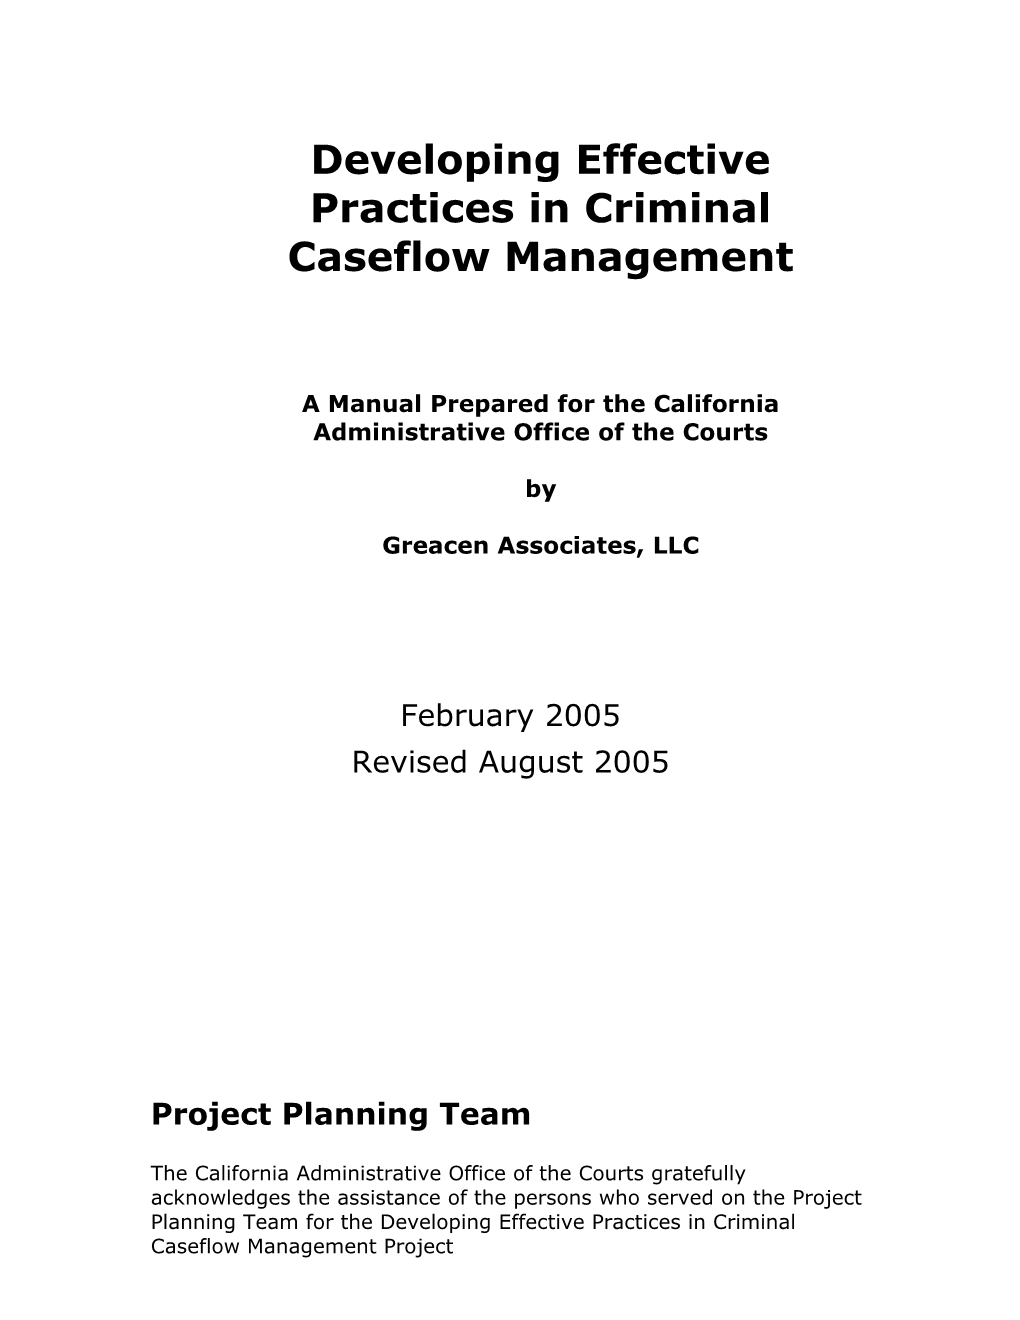 Outline of Effective Practices Manual